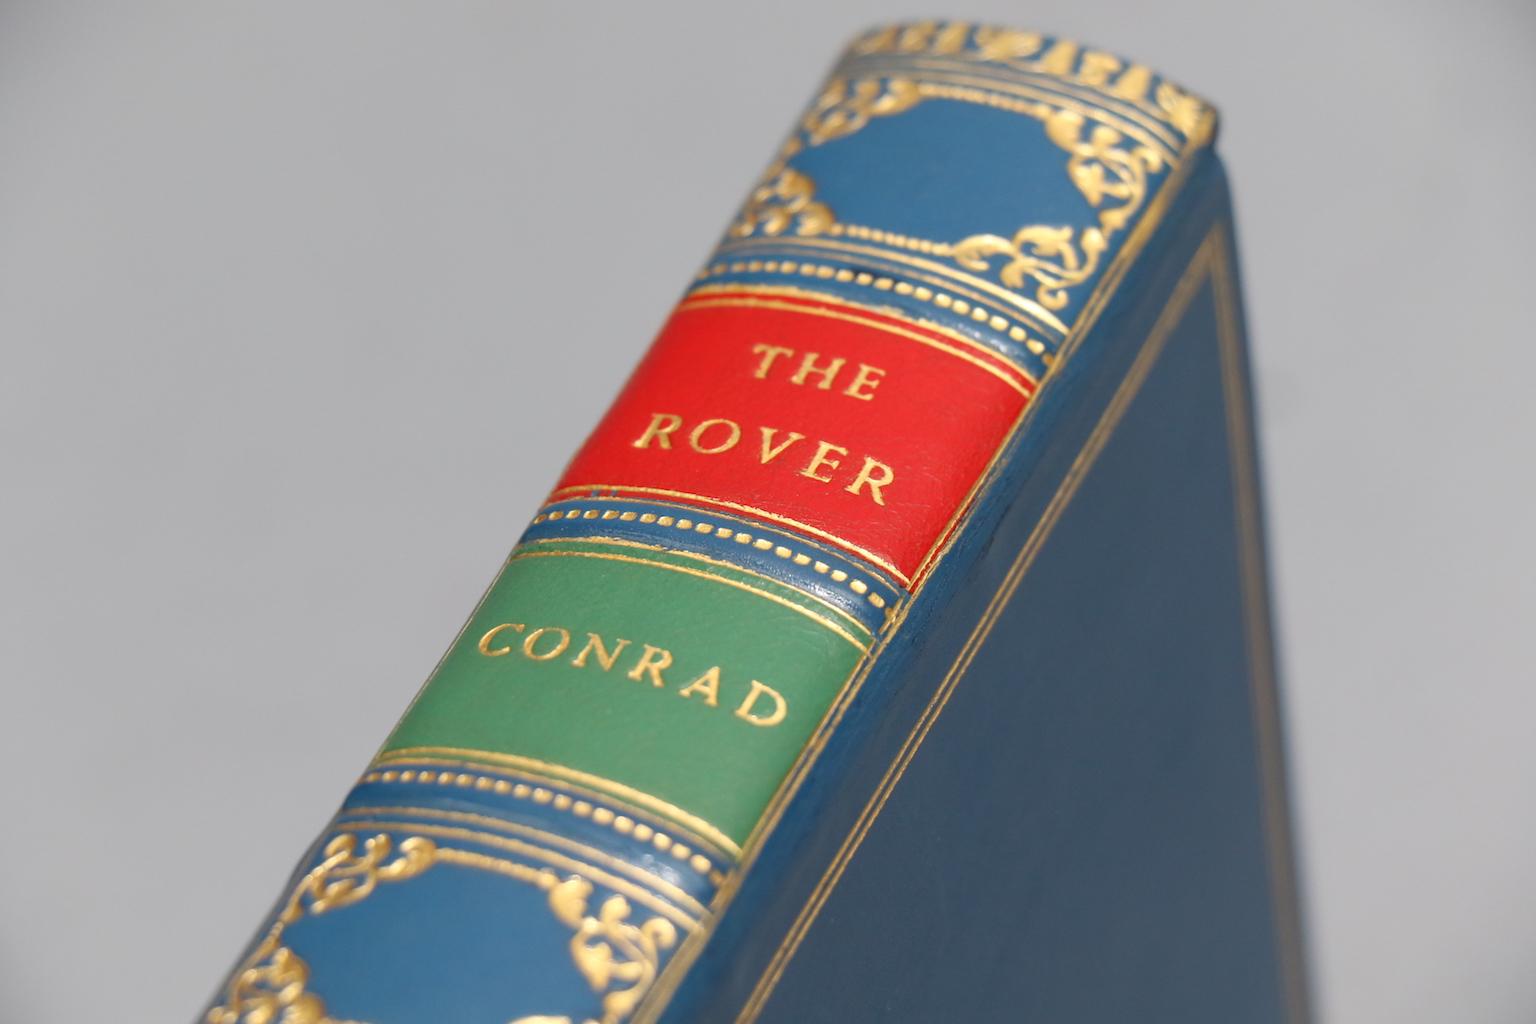 One volume. Octavo. Bound in full blue calf leather by Bayntun with all edges gilt, raised bands, and gilt panels on spine.

Published in London by T. Fisher Unwin in 1923.

Joseph Conrad (1857-1924) was a Polish-British writer regarded as one